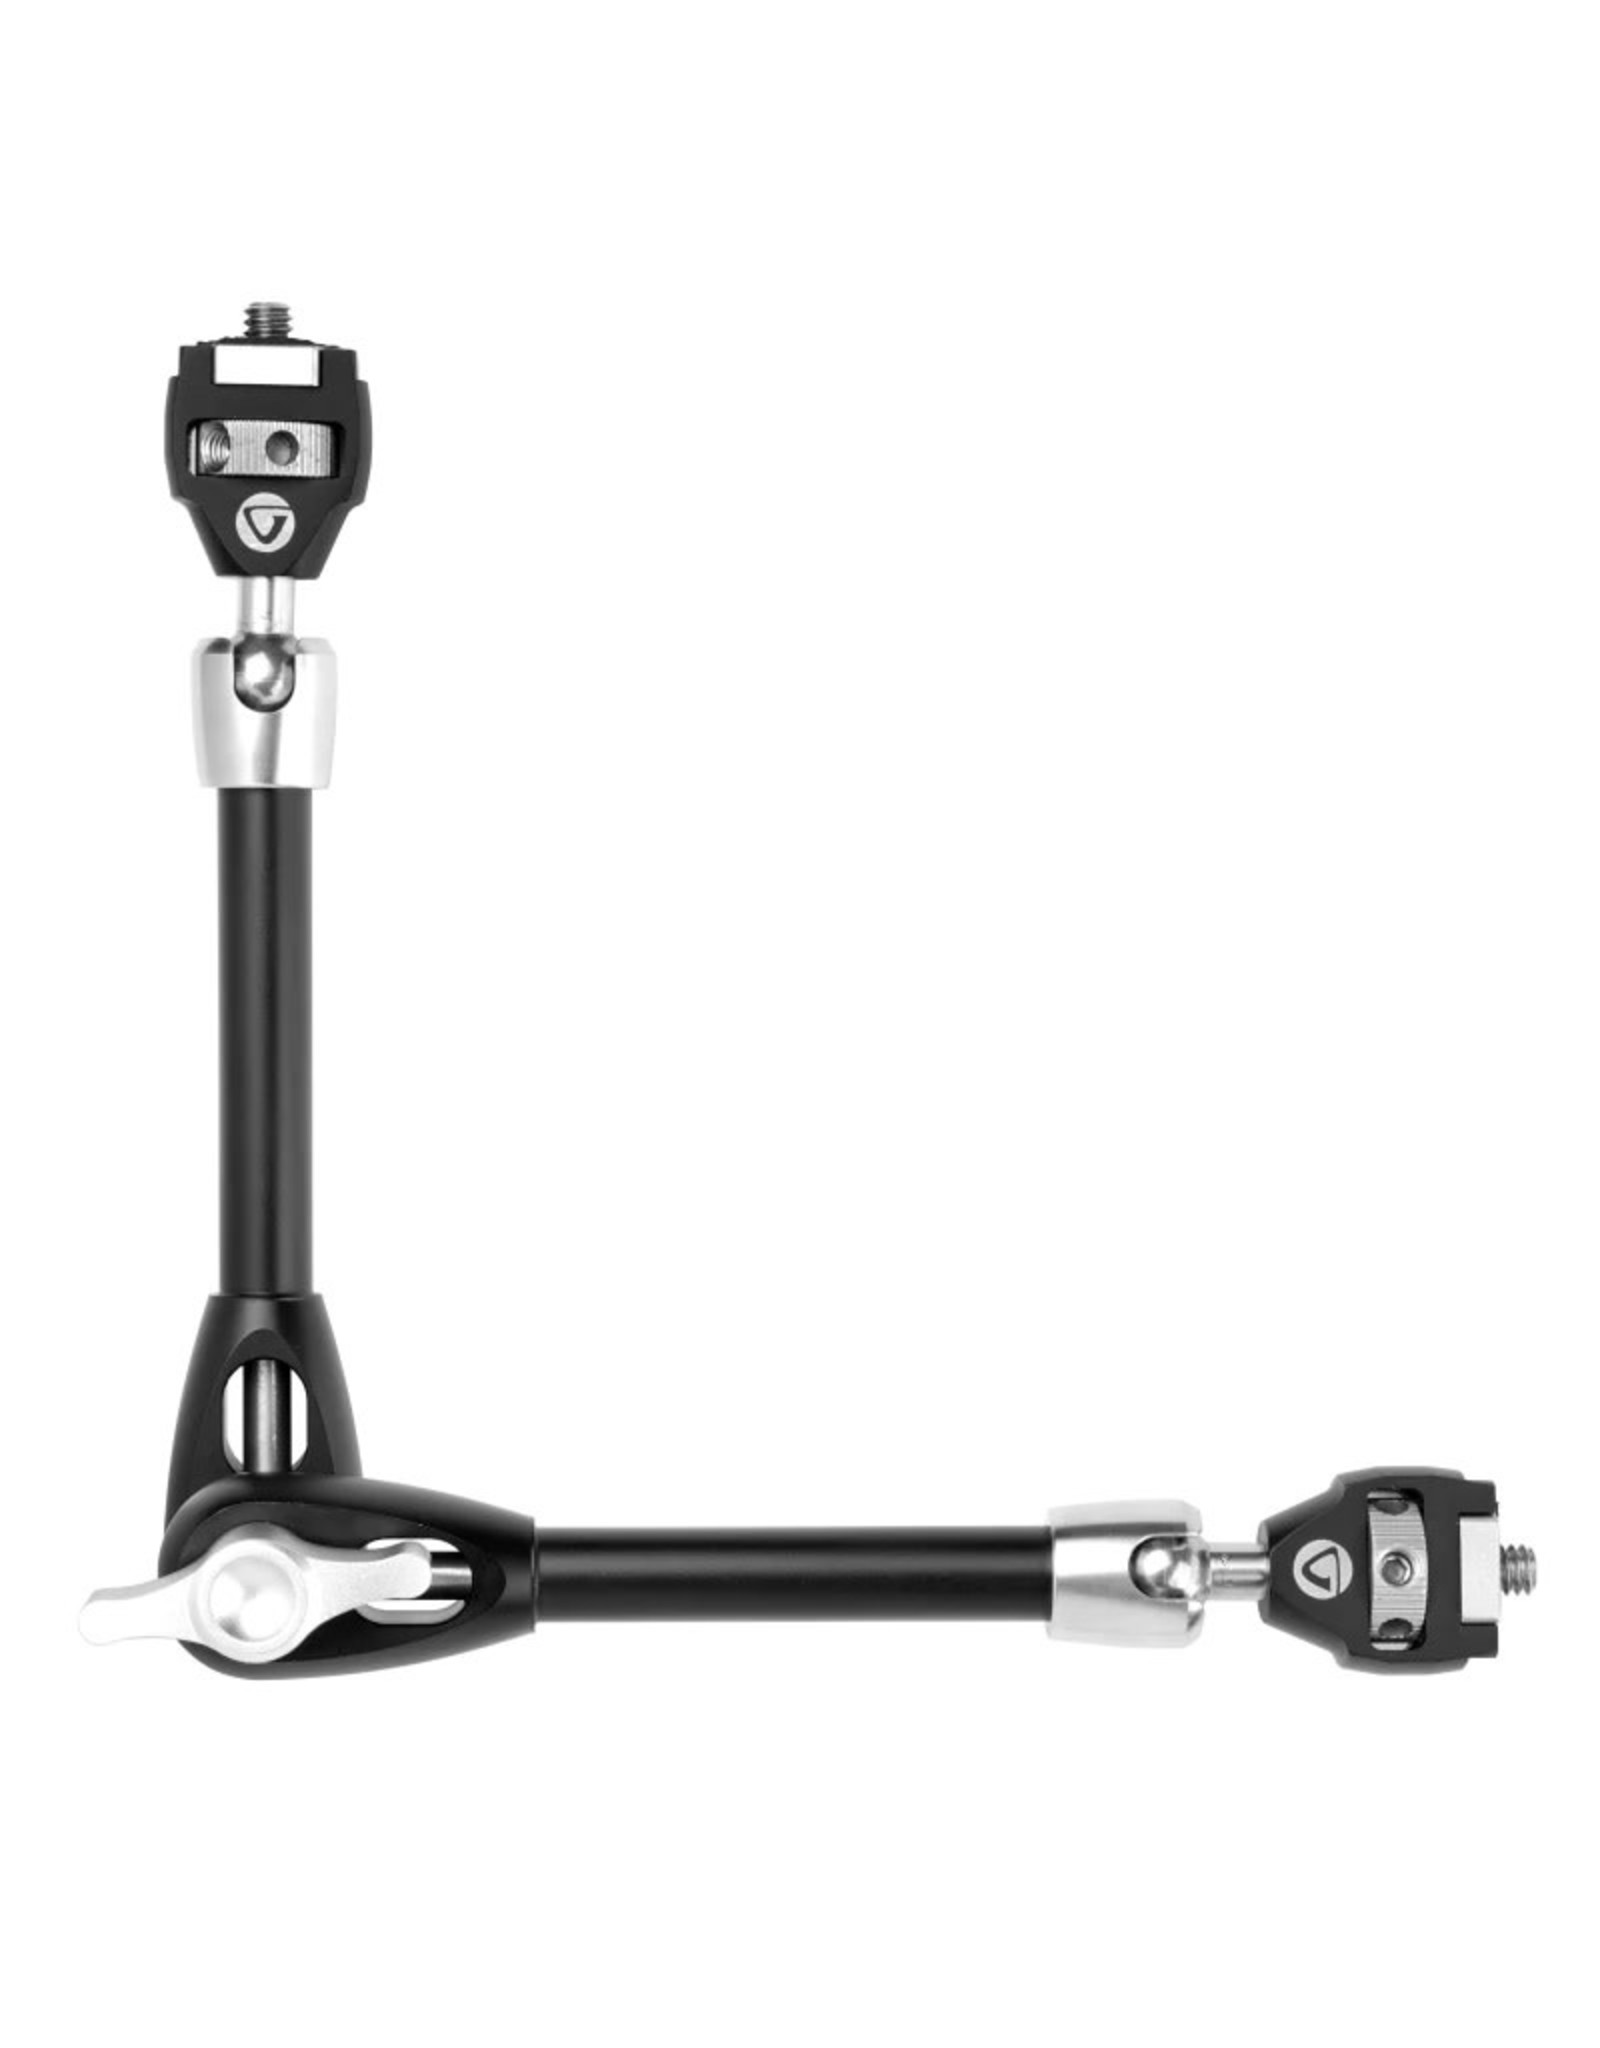 Vanguard VEO CP-65 KIT W/ CLAMP, DELUXE SUPPORT ARM & SMARTPHONE HOLDER